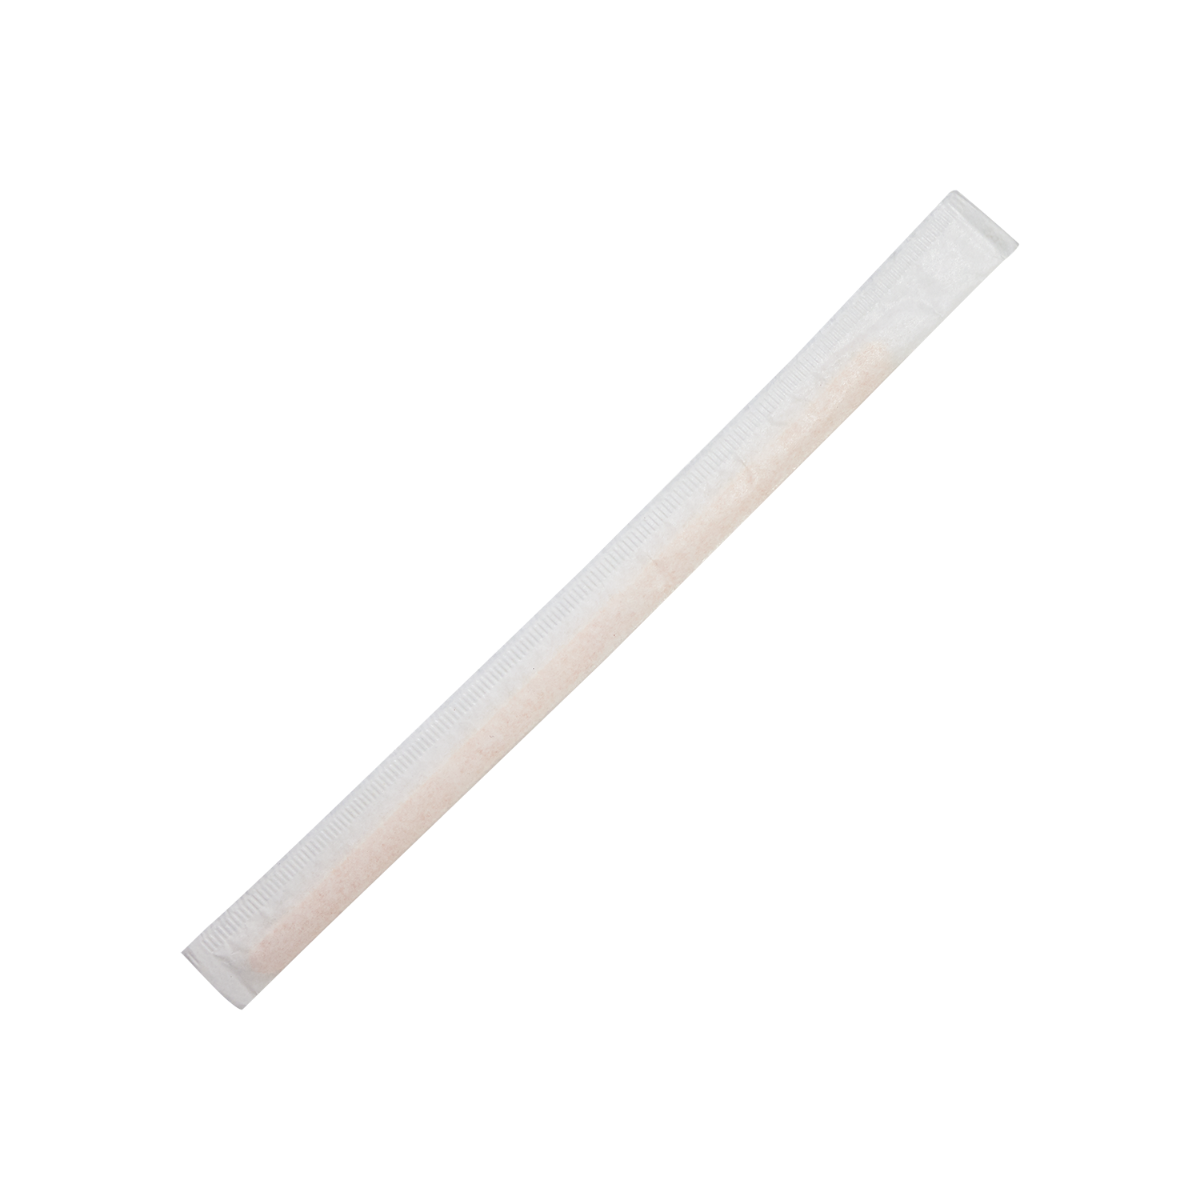 https://www.restaurantsupplydrops.shop/wp-content/uploads/1689/34/wrapped-wood-stirrers-karat-earth-5-5-wooden-stir-sticks-paper-wrapped-5000-ct-karat-find-our-top-rated-items_0.png